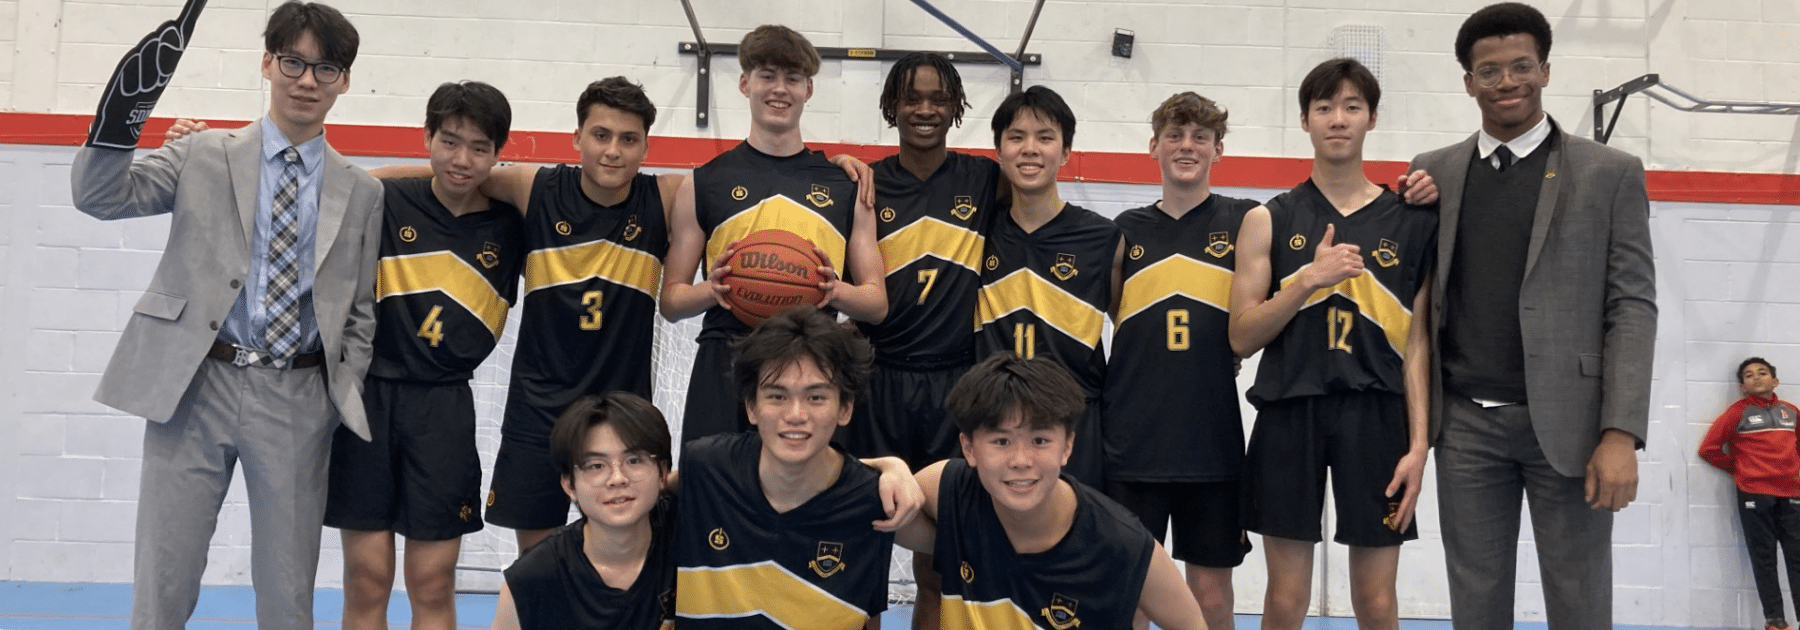 Under 16 Basketball Team Victorious